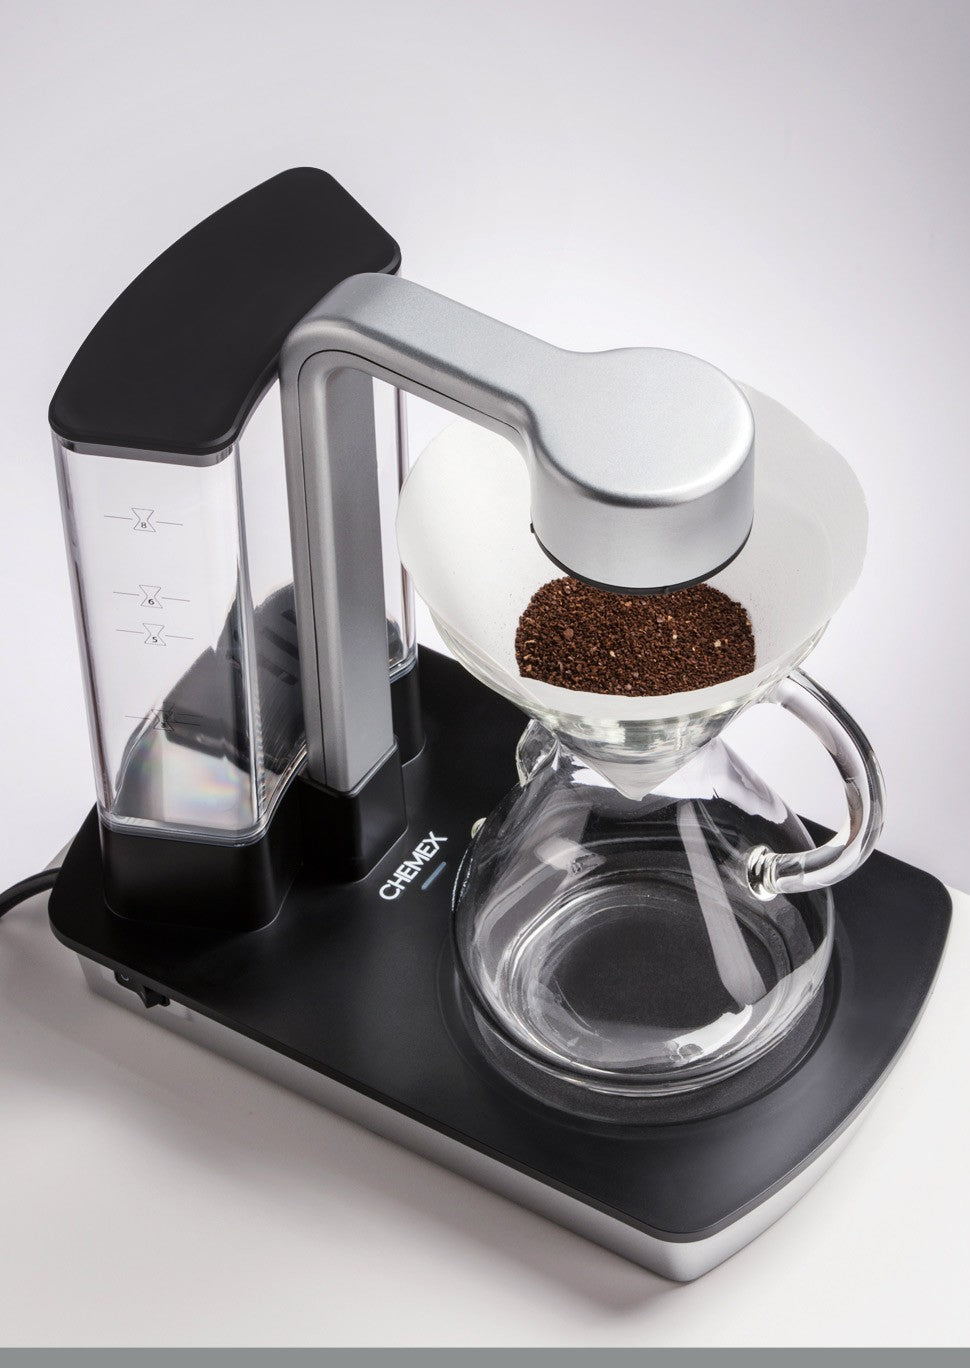 Chemex Just Announced A $350 Automatic Coffee Machine. Will It